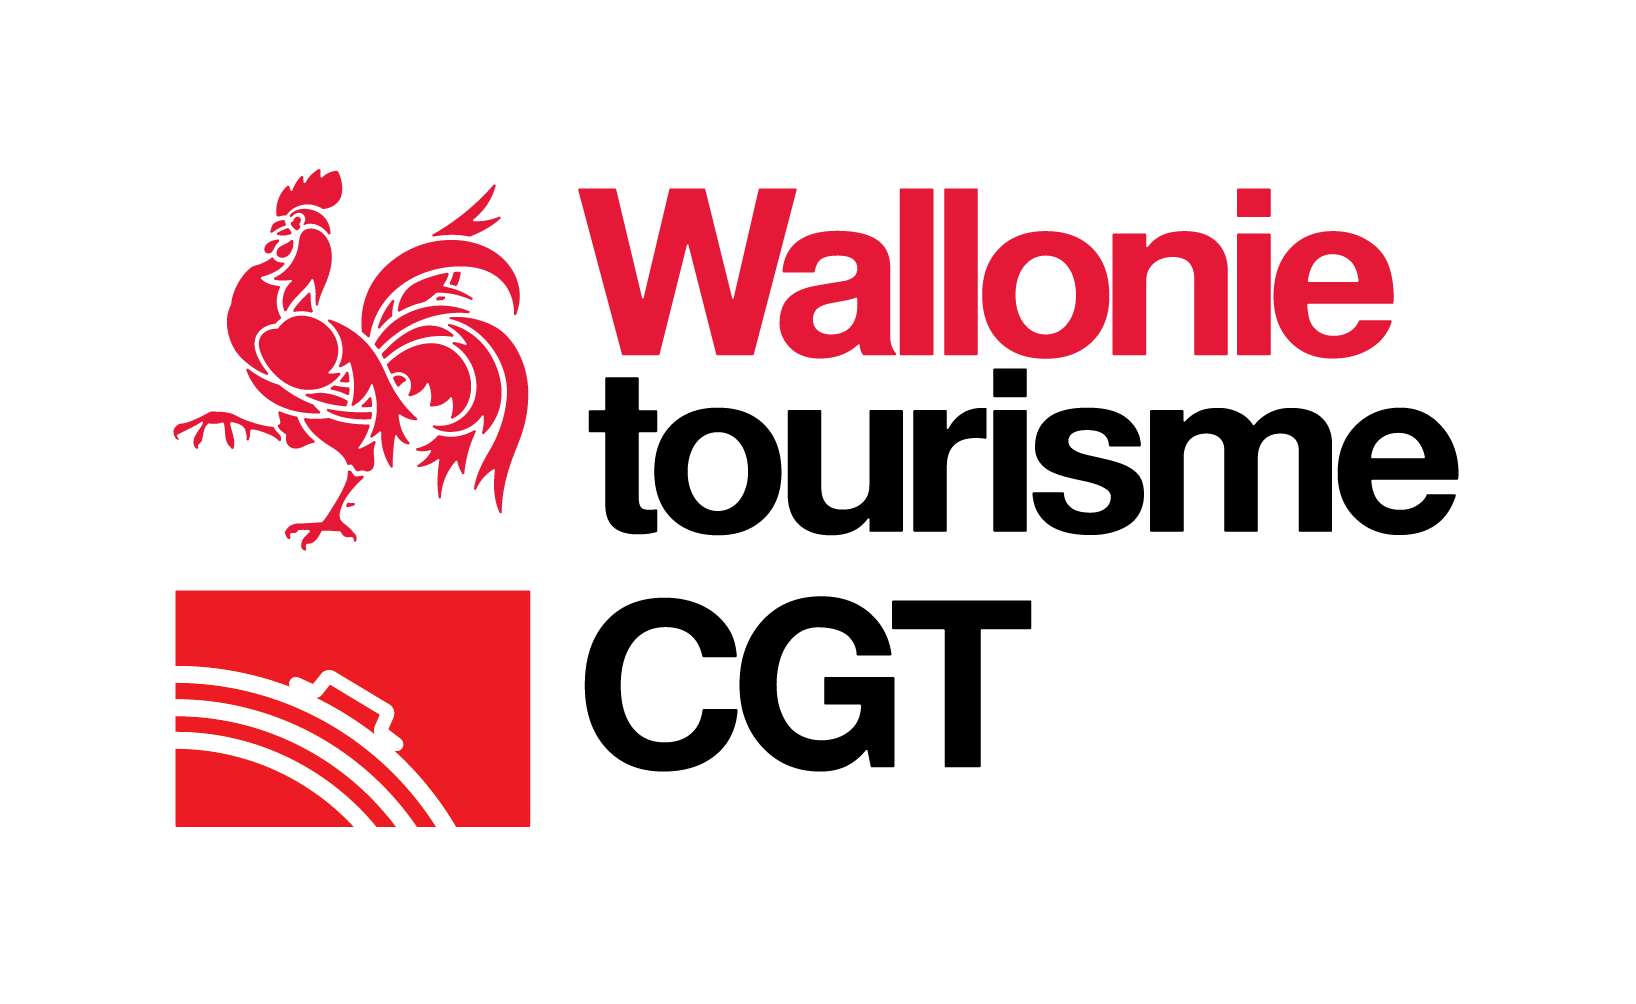 Practical guide “Dare to take time for yourself in Wallonia”